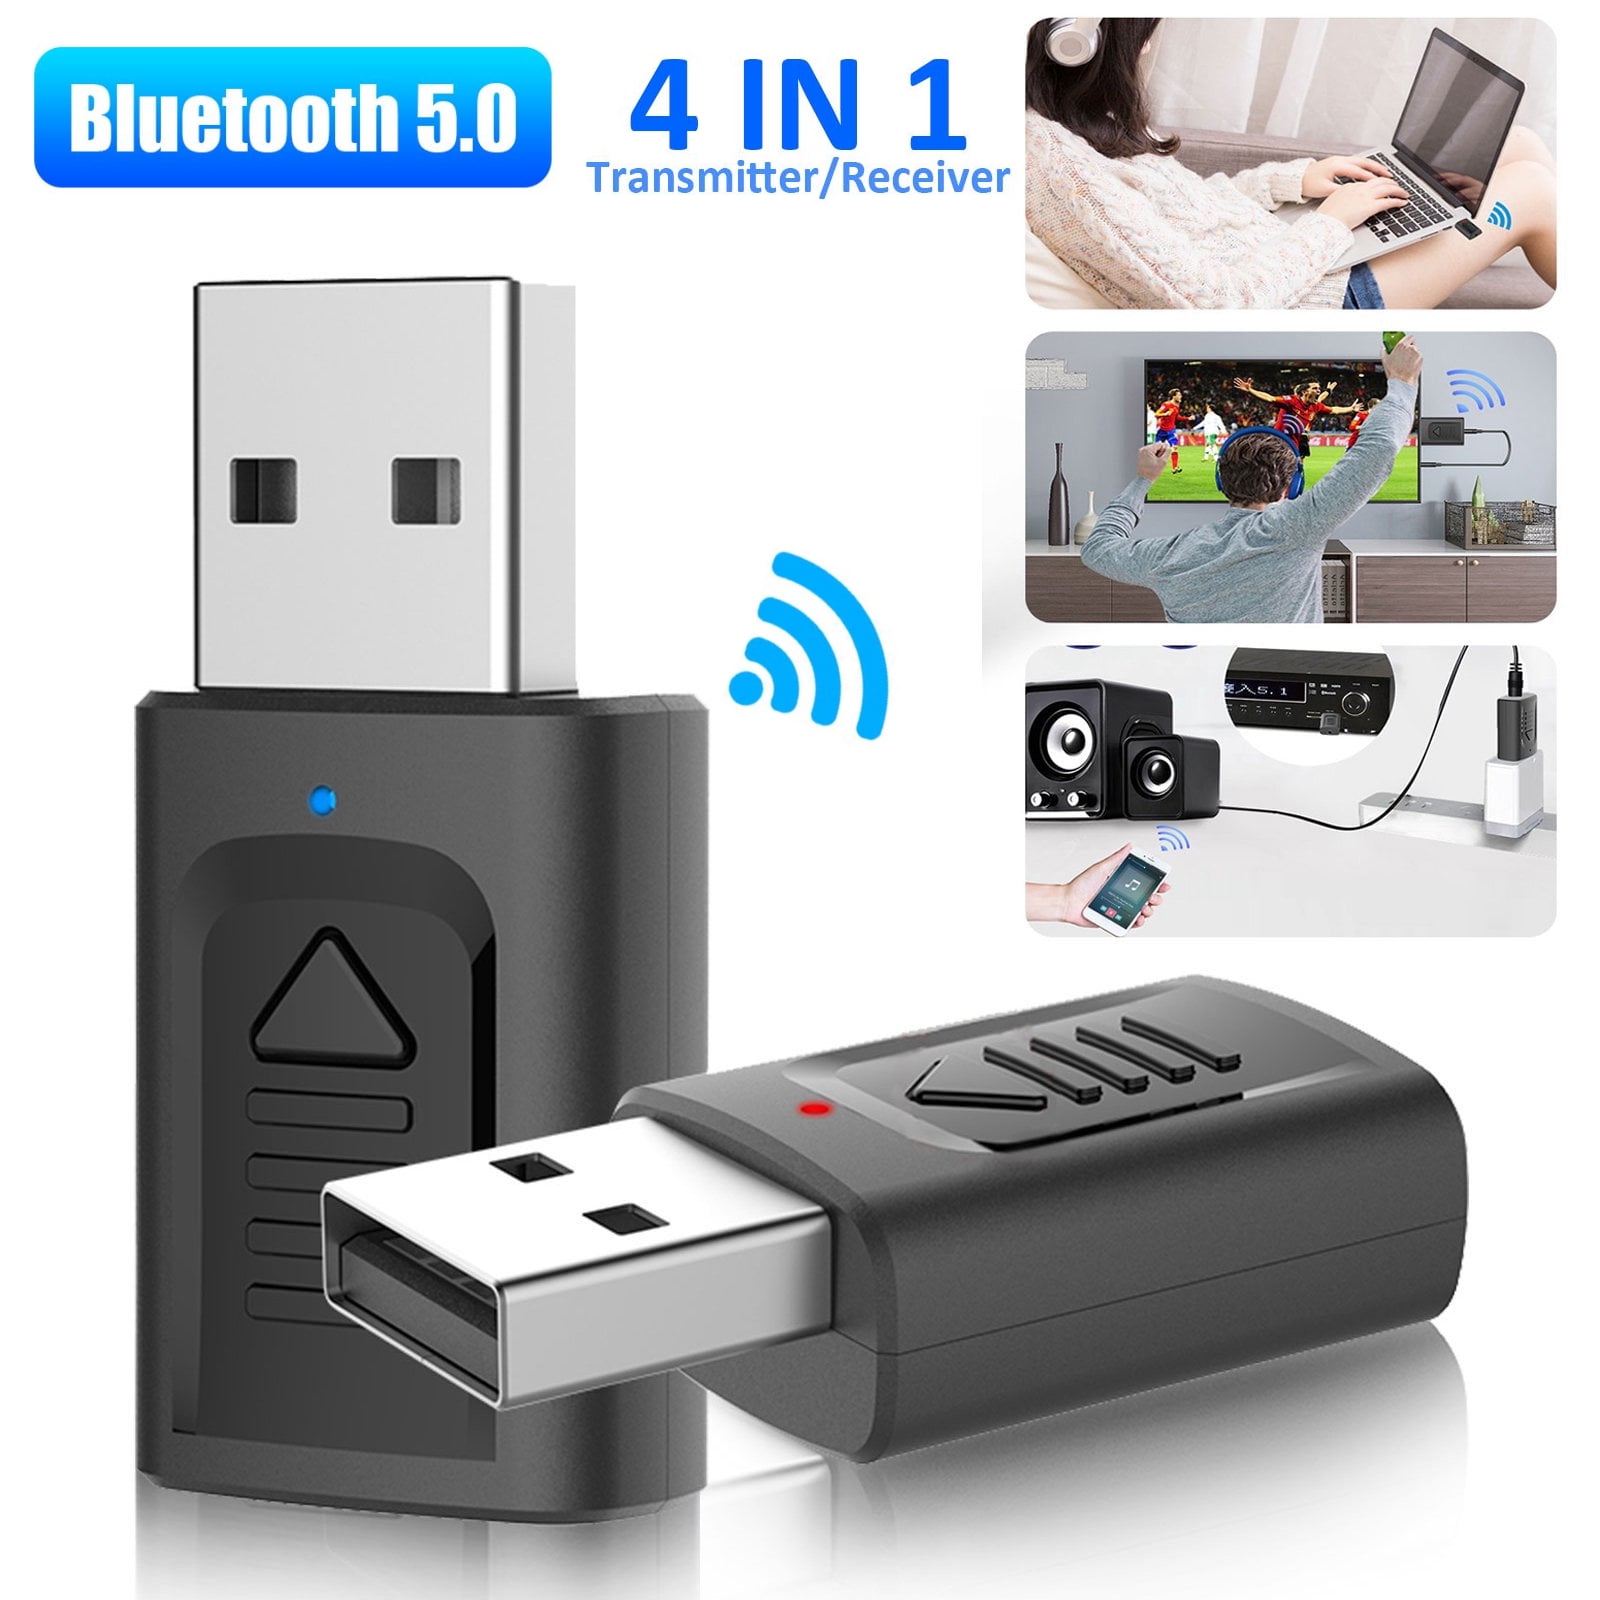 Portable USB Bluetooth Transmitter for TV, Low Latency Wireless Audio for 3.5mm Stereo, Bluetooth 5.0 Receiver for Bluetooth Headphones/ Tablet, Computer - Walmart.com